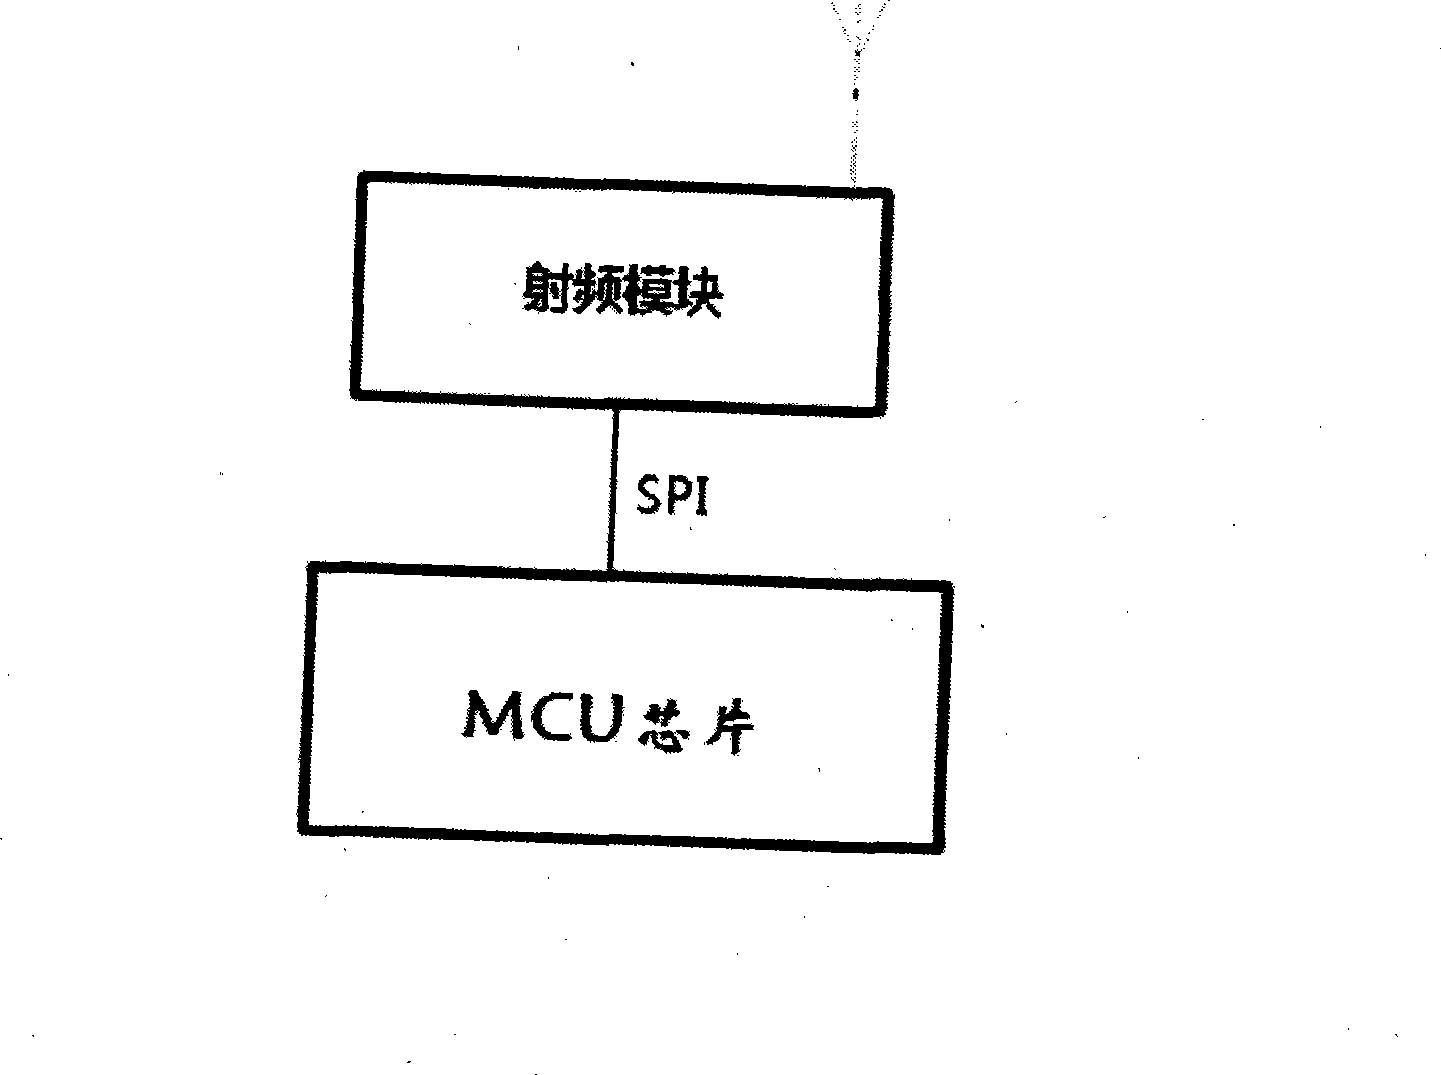 Remote wireless centralization meter-reading method and system